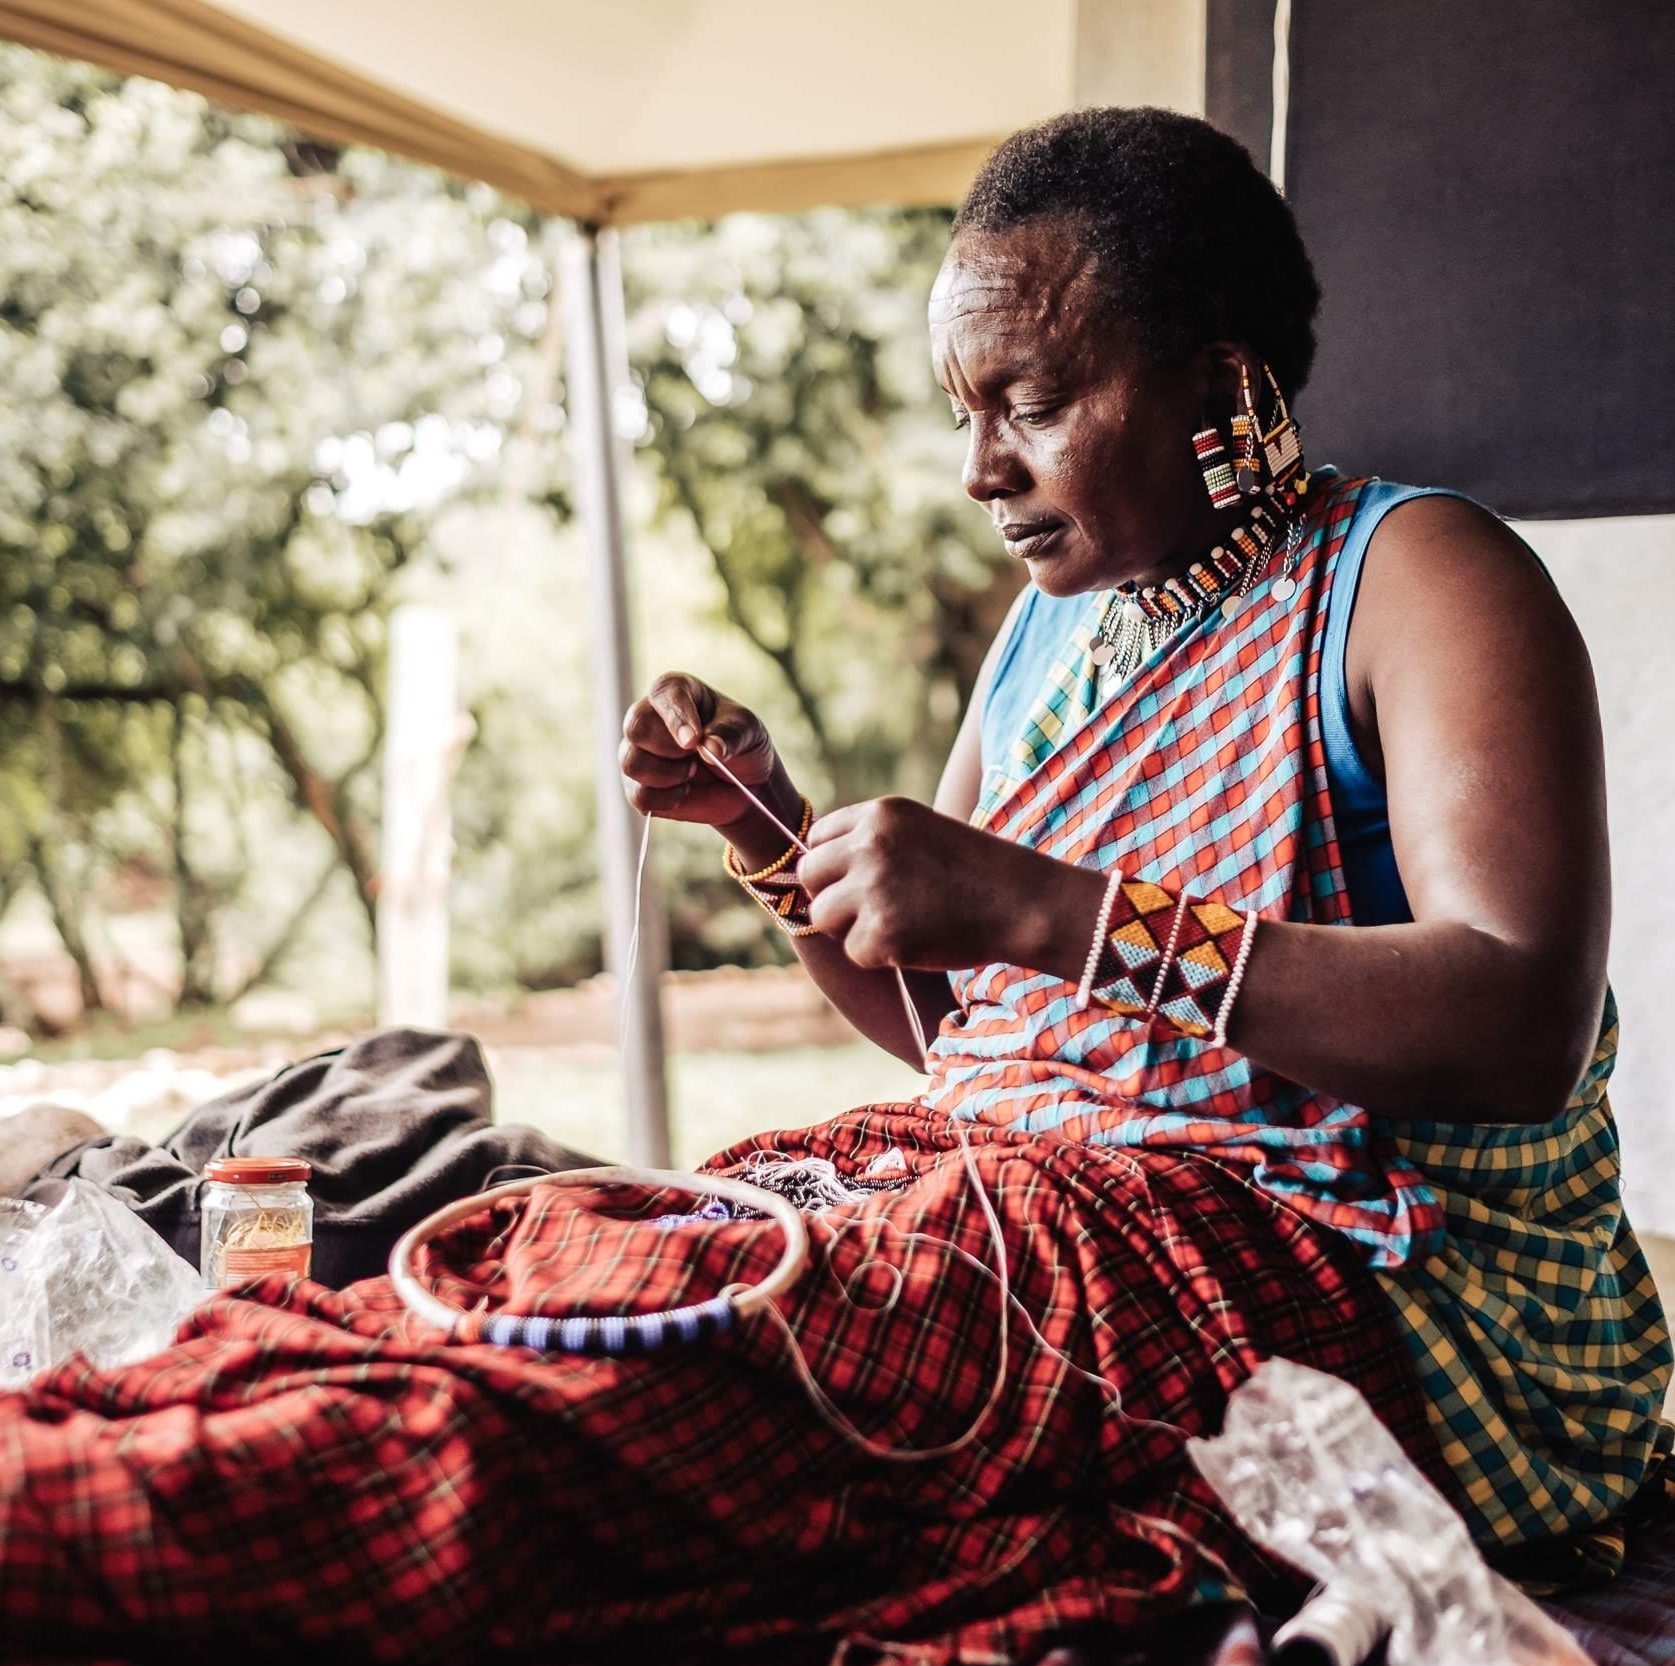 A Masai craftsperson threading a needle and beads for a necklace.